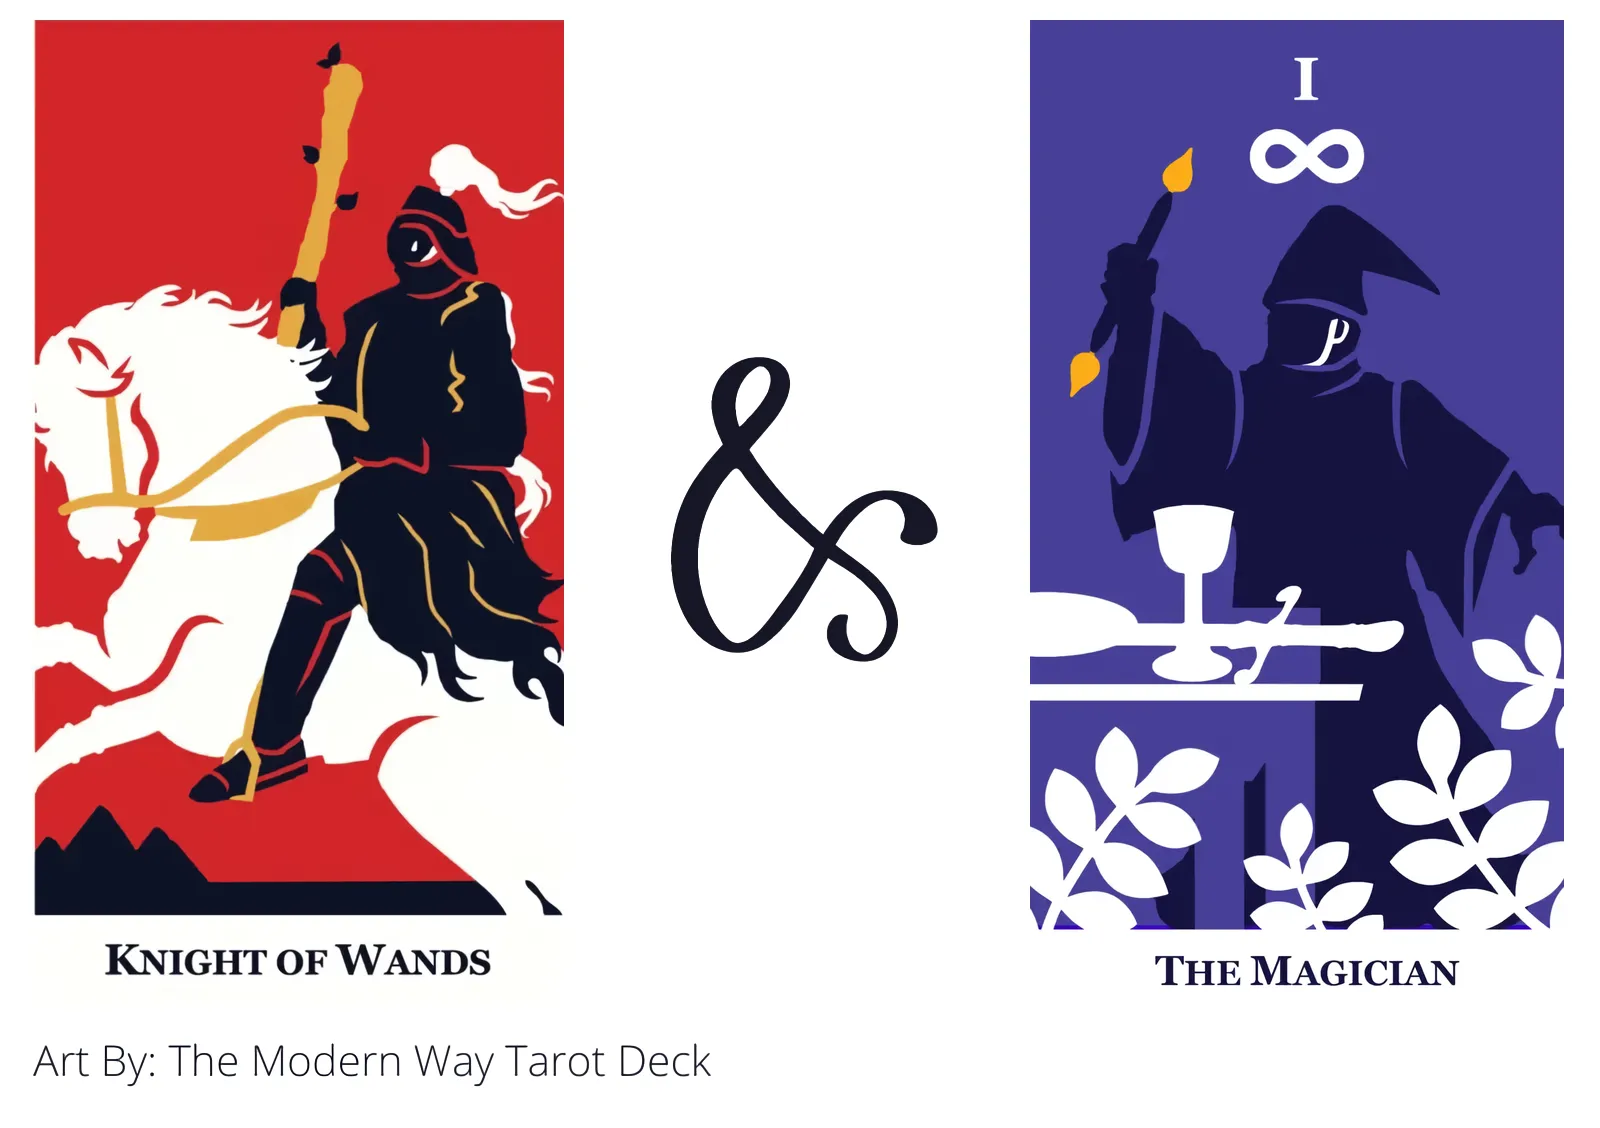 knight of wands and the magician tarot cards together